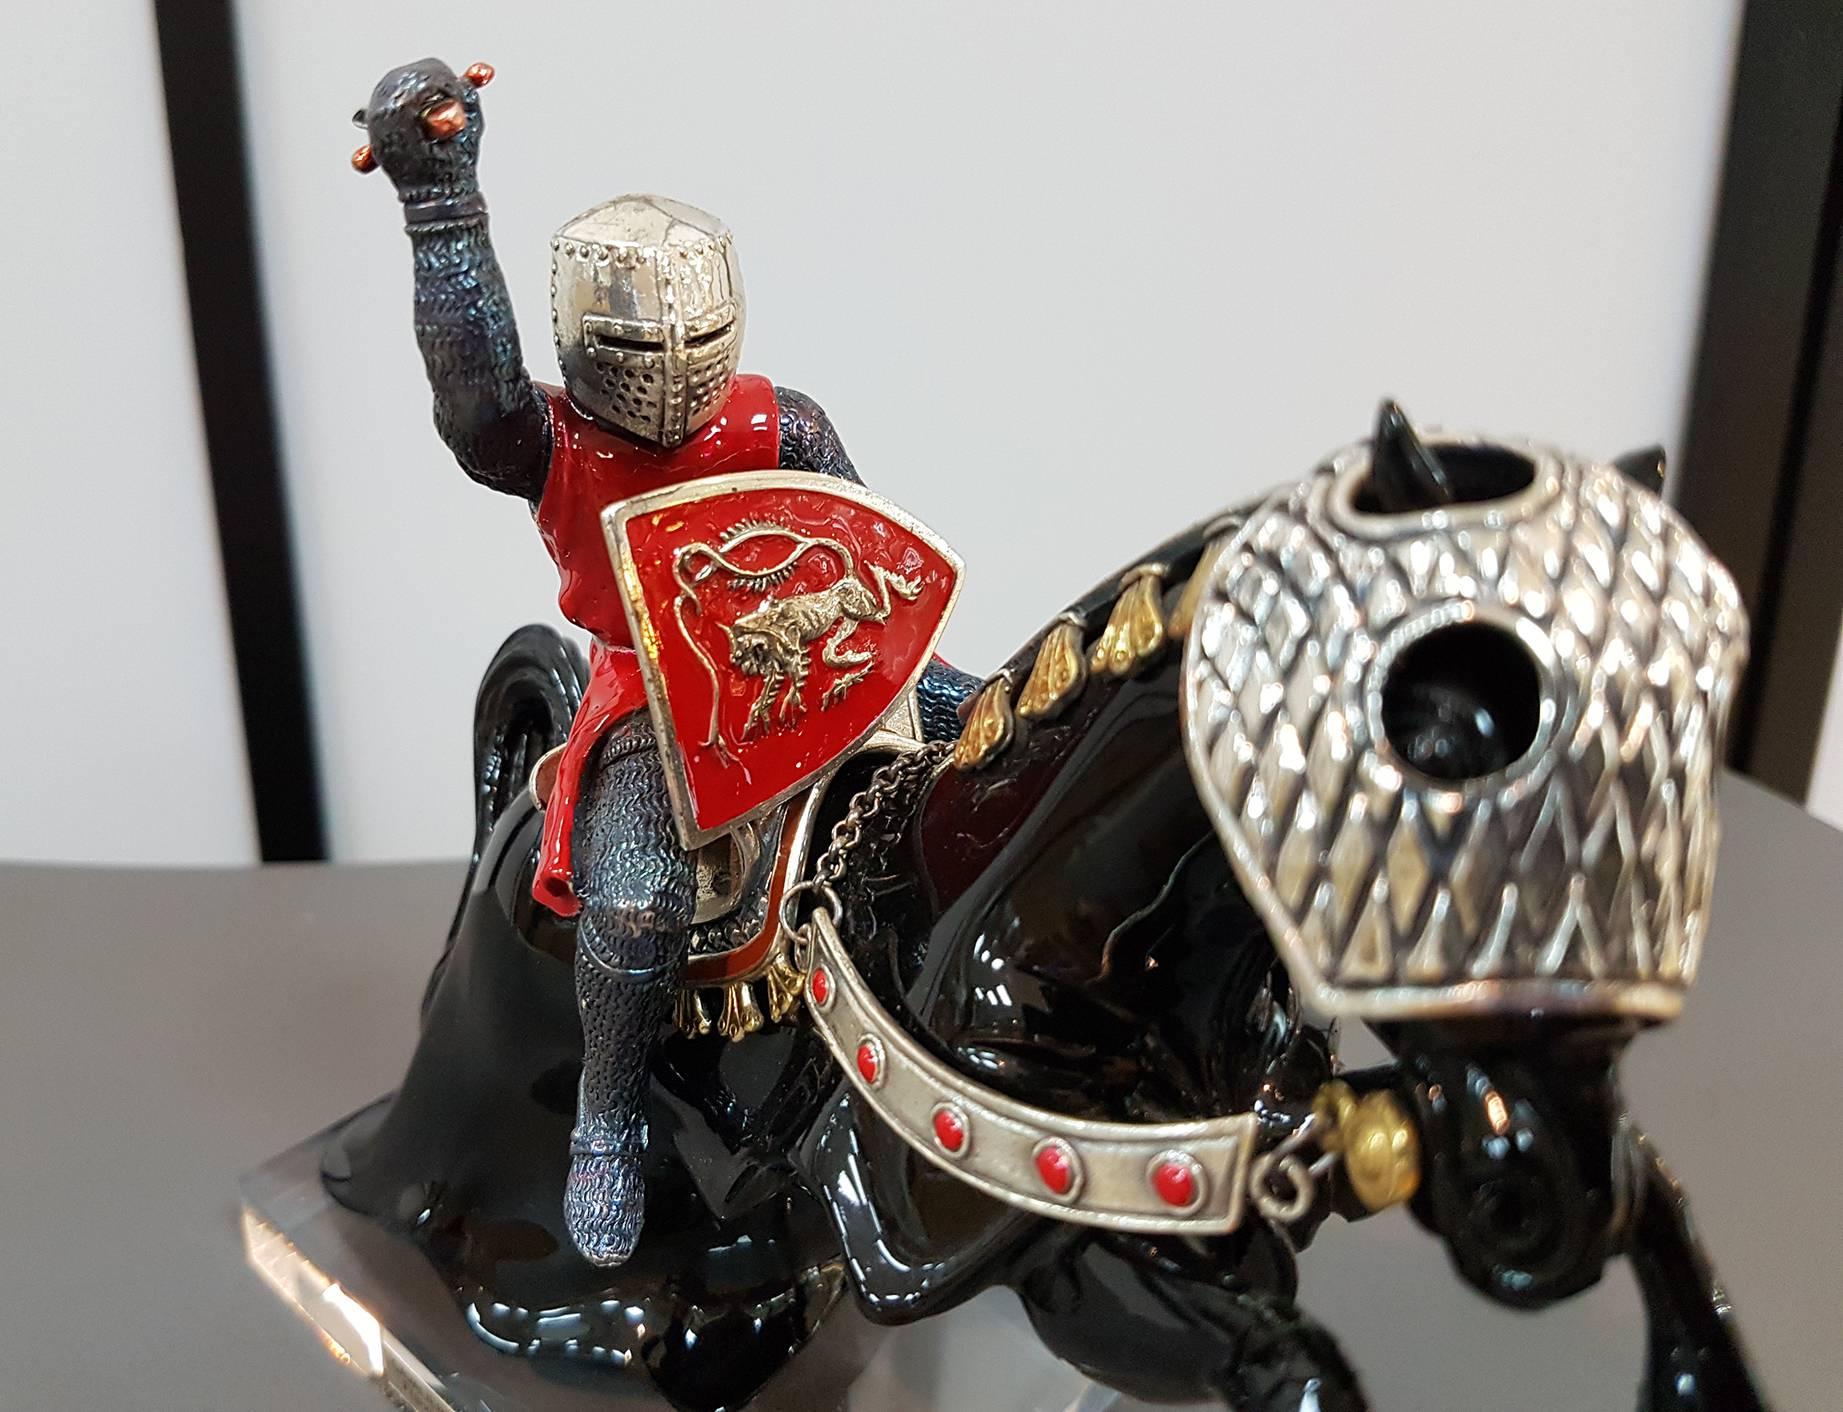 Horse in black lacquered resin with a sterling silver armor with French 13th century Knight in sterling silver armor with golden and enamelled details
376 grams of sterling silver.